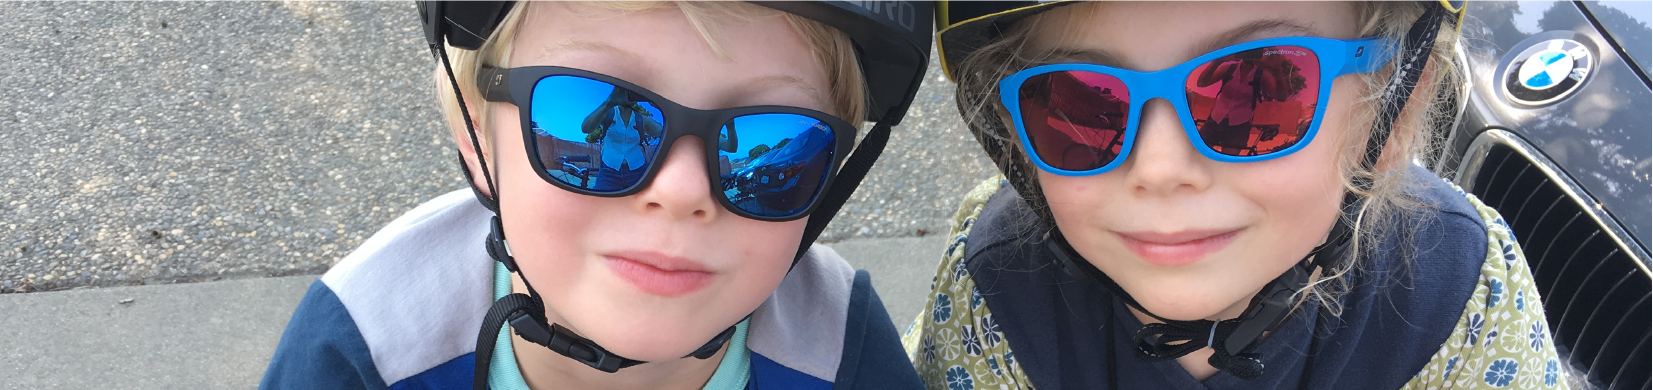 Photo of two of our staffer's children out on a family bike ride.